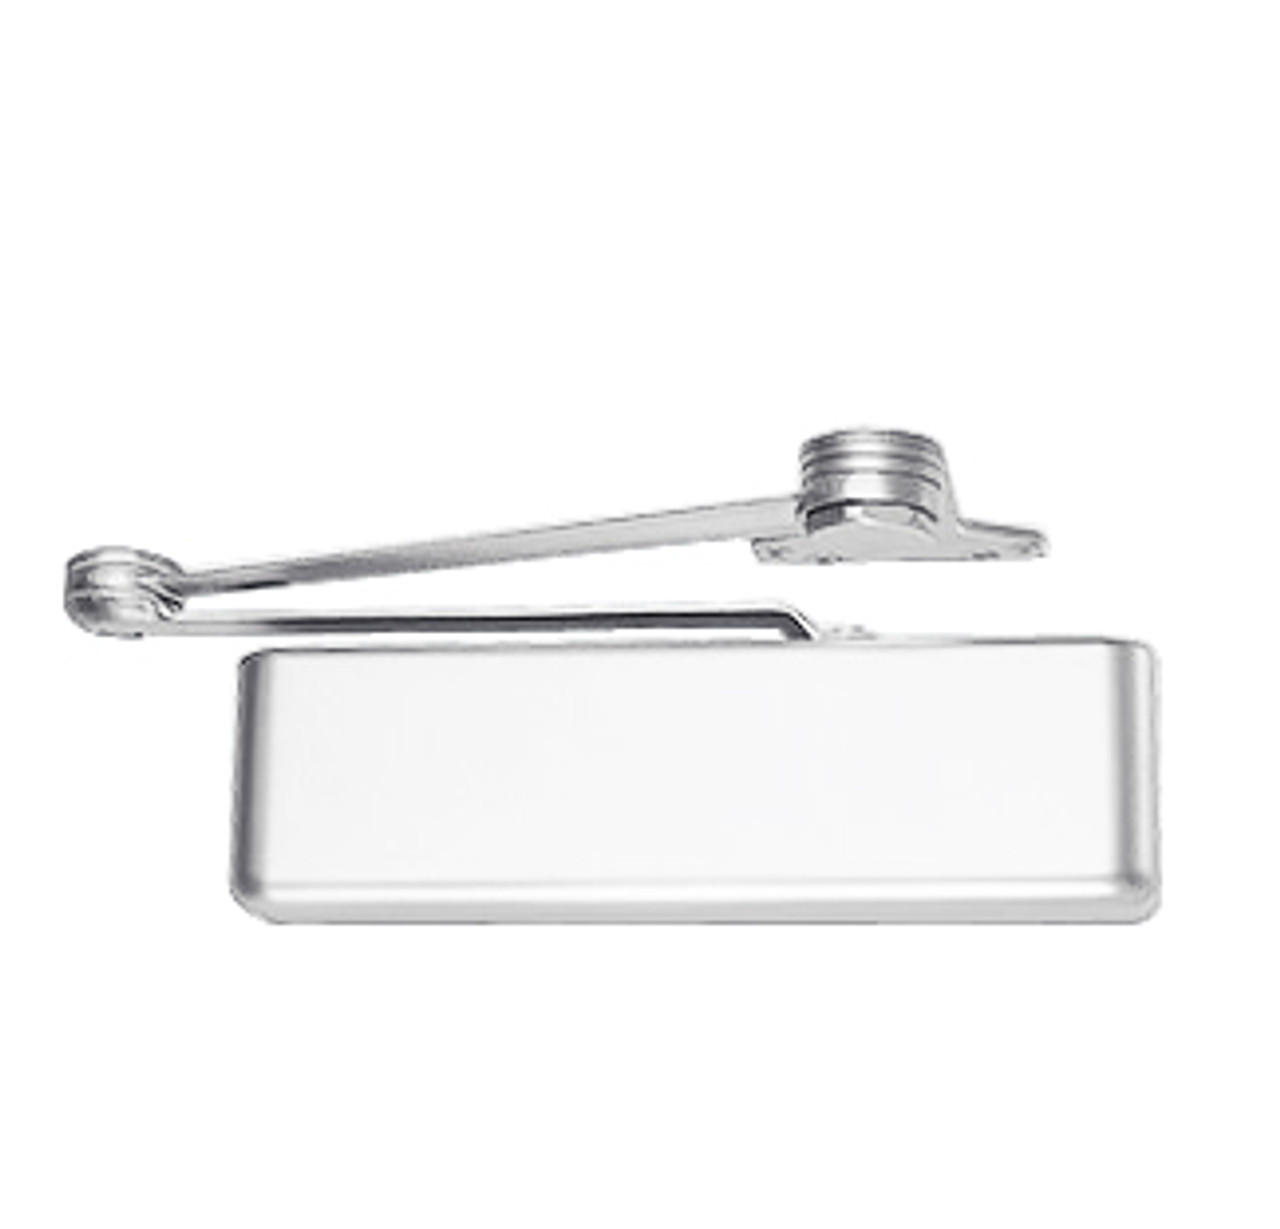 4516-EDA-LH-US26 LCN Door Closer with Extra Duty Arm in Bright Chrome Finish